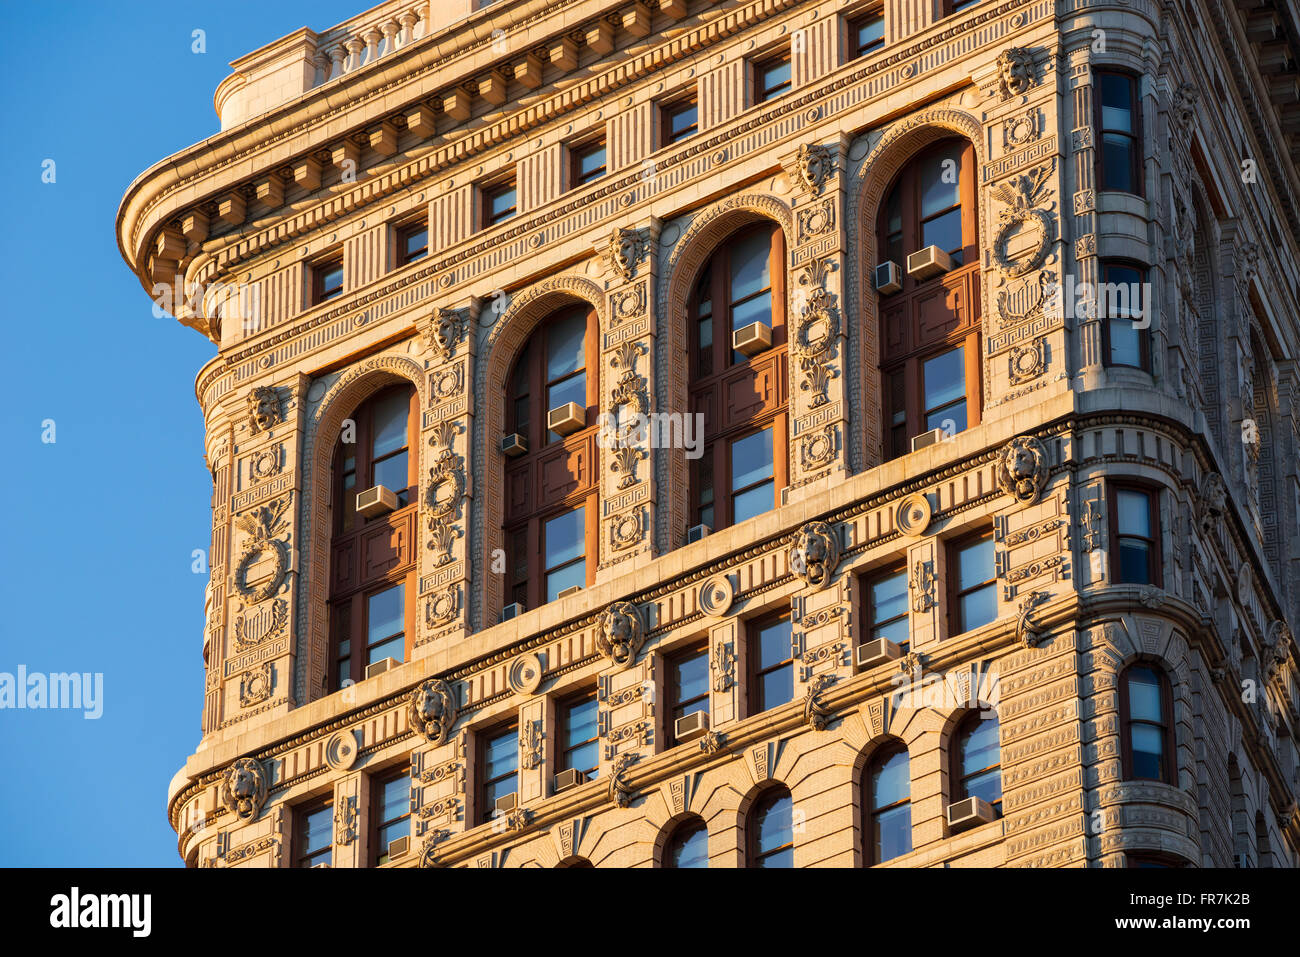 Flatiron Building (Beaux-Arts style) south facade at sunset showcasing intricate terracotta ornaments. Midtown, New York City Stock Photo